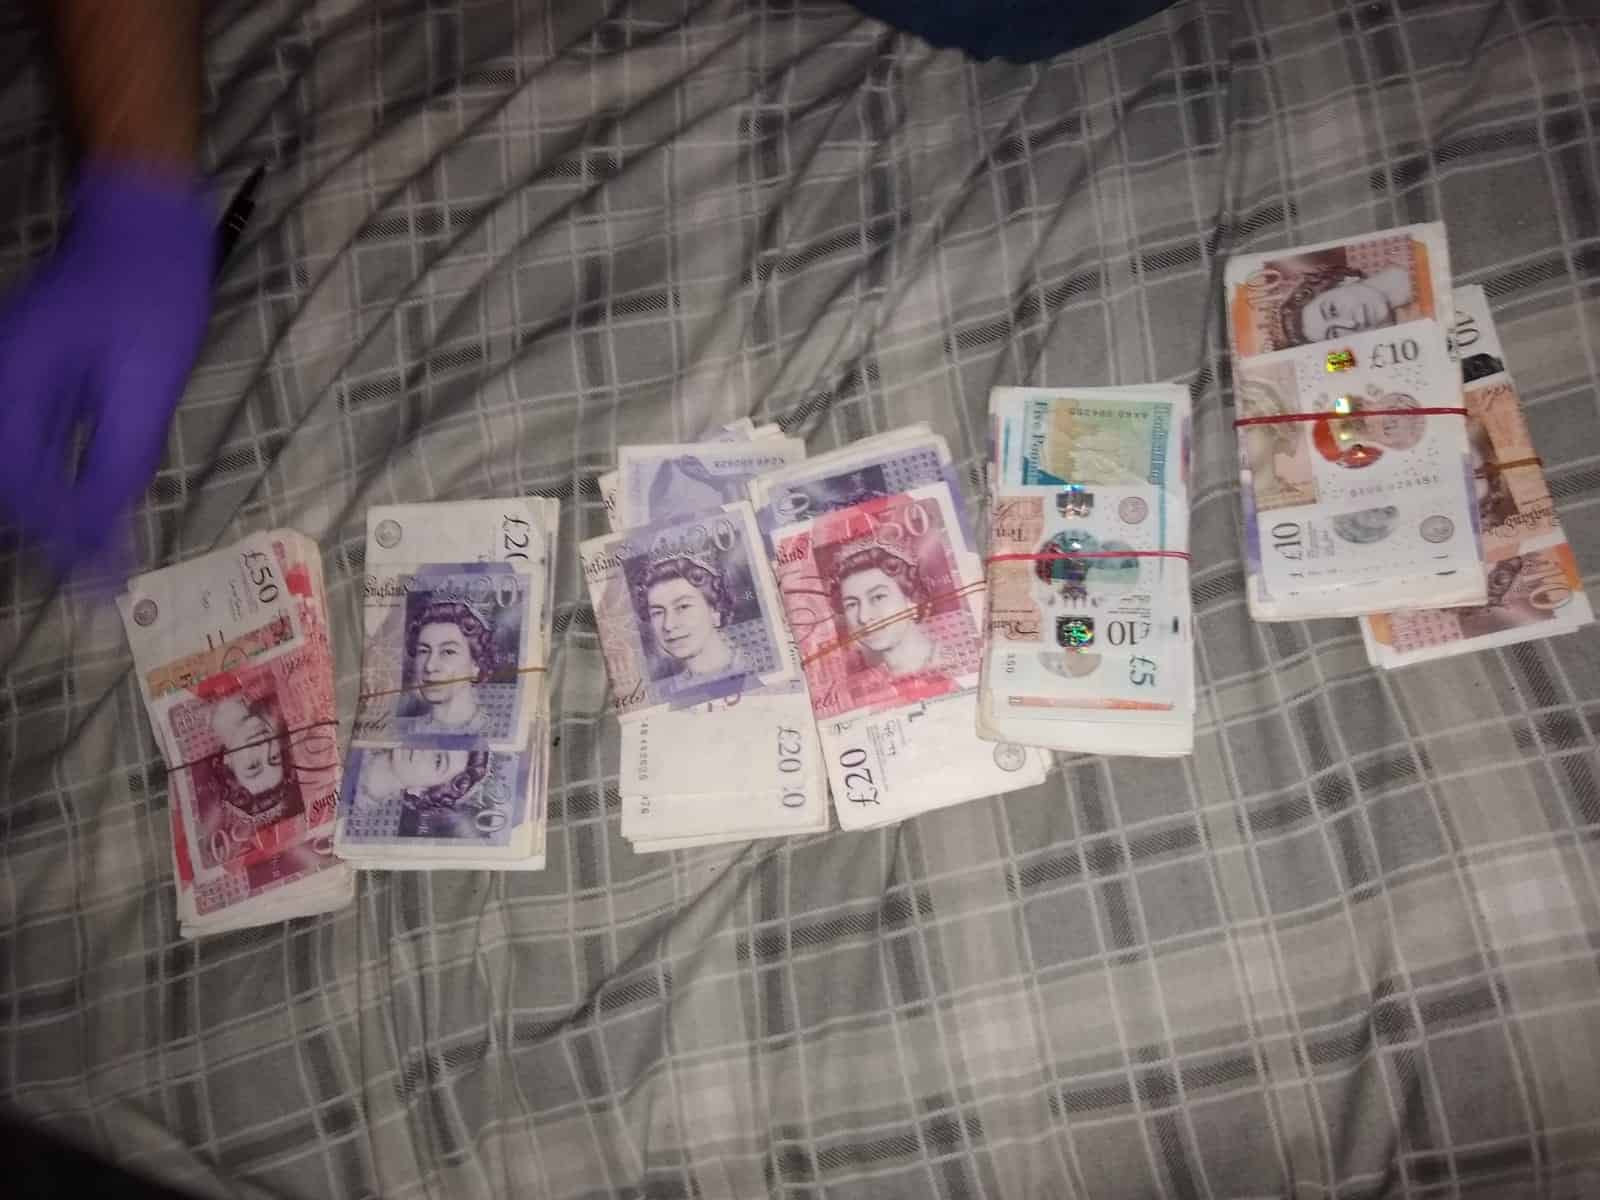 Some of the cash recovered at Dan-Othman's address